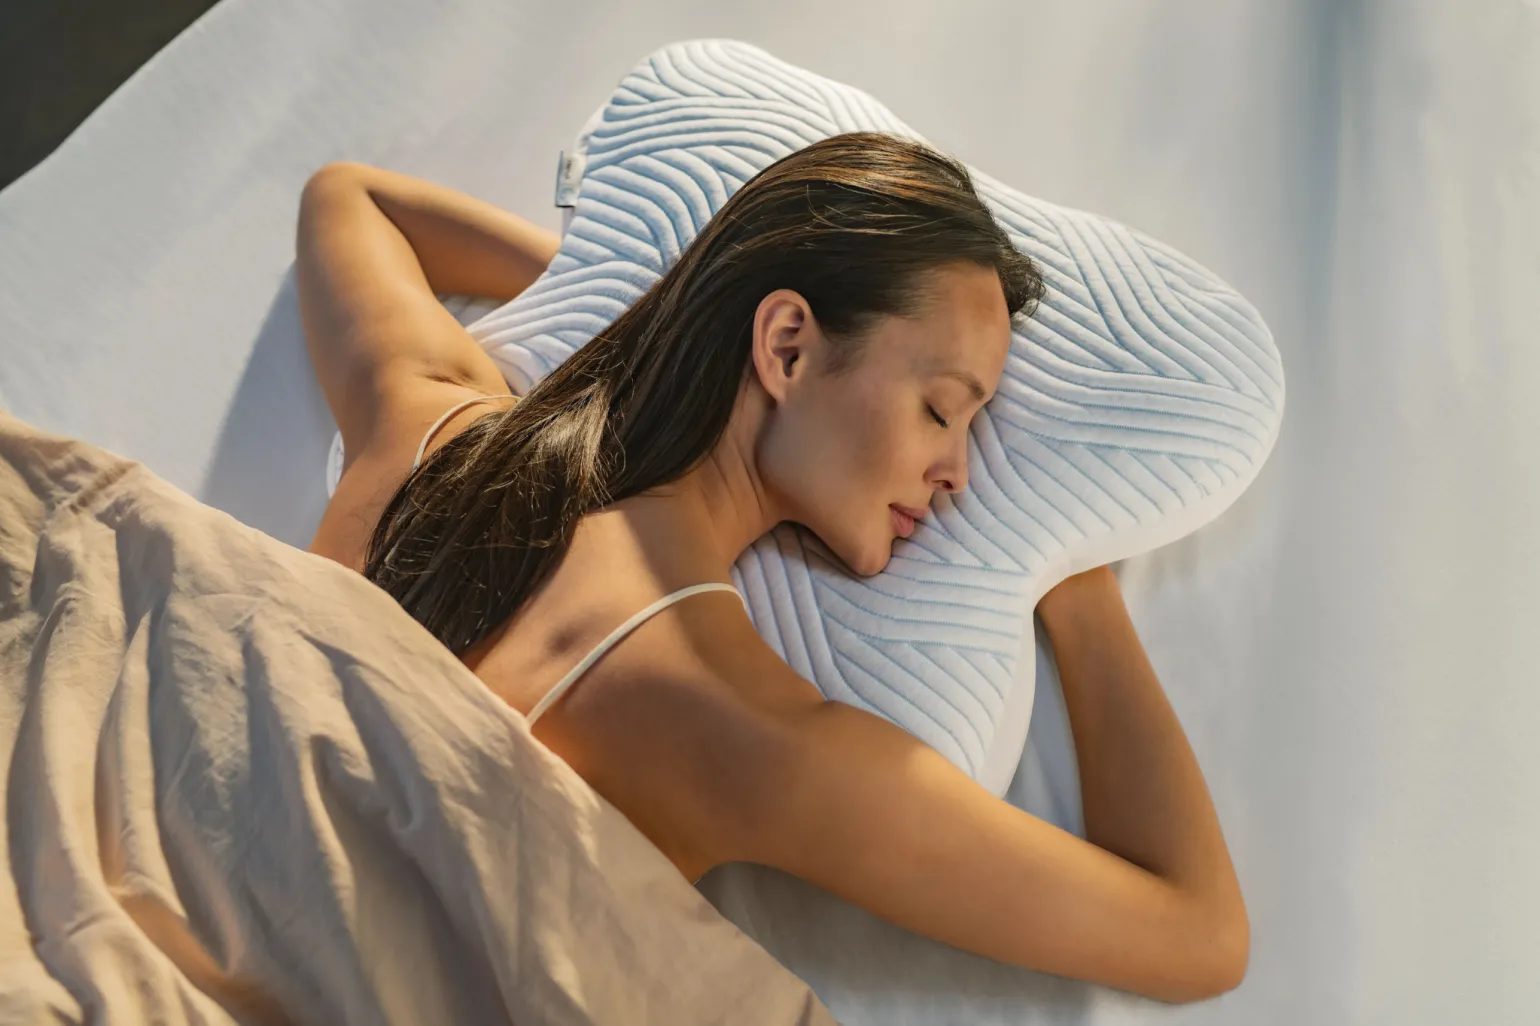 The TEMPUR SmartCool™ pillows give you tailored support and cooling comfort, via innovation and incredible technology.  

So whether it’s the Ombracio; Cloud; or Original Smartcool,  the incredible range of Tempur pillows gives the perfect balance for a true, restful nights sleep.
